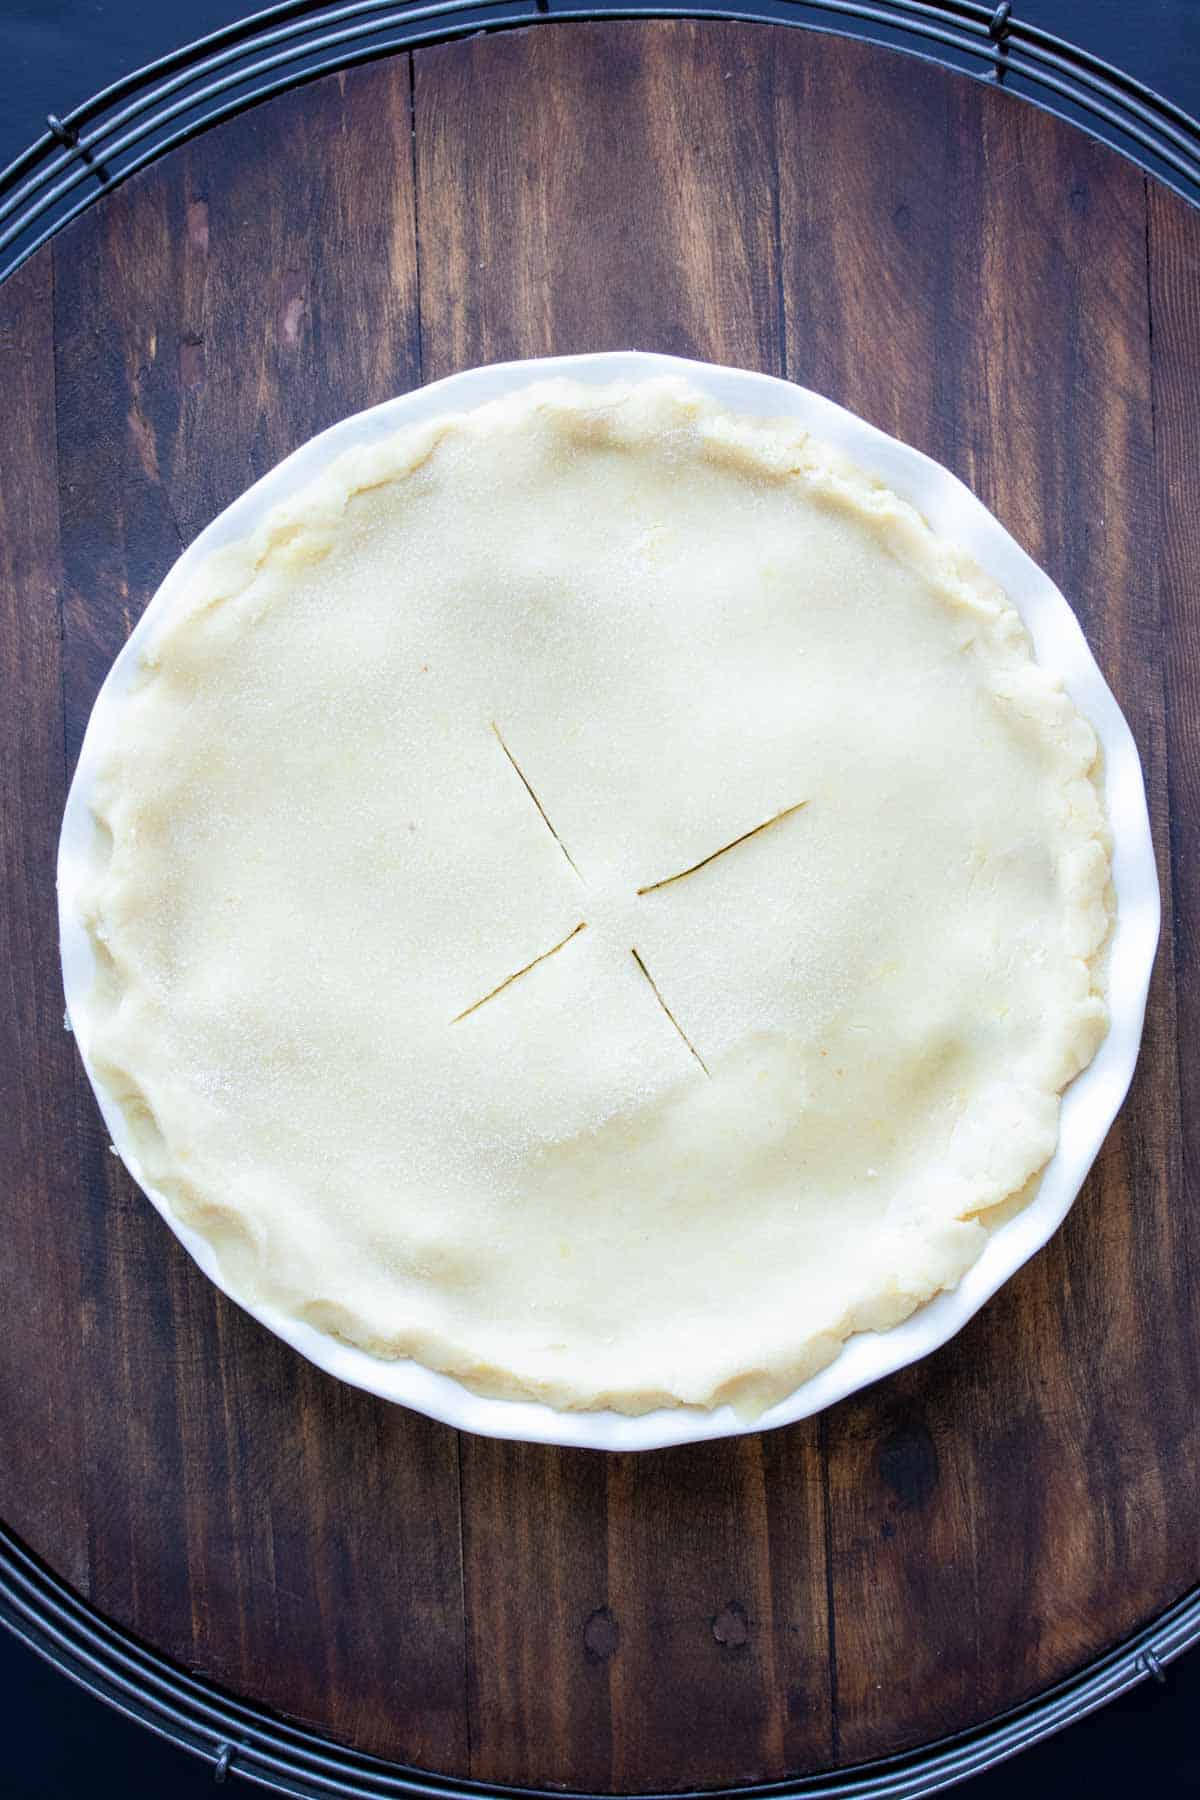 Top view of an unbaked vegetable pot pie in a pie dish